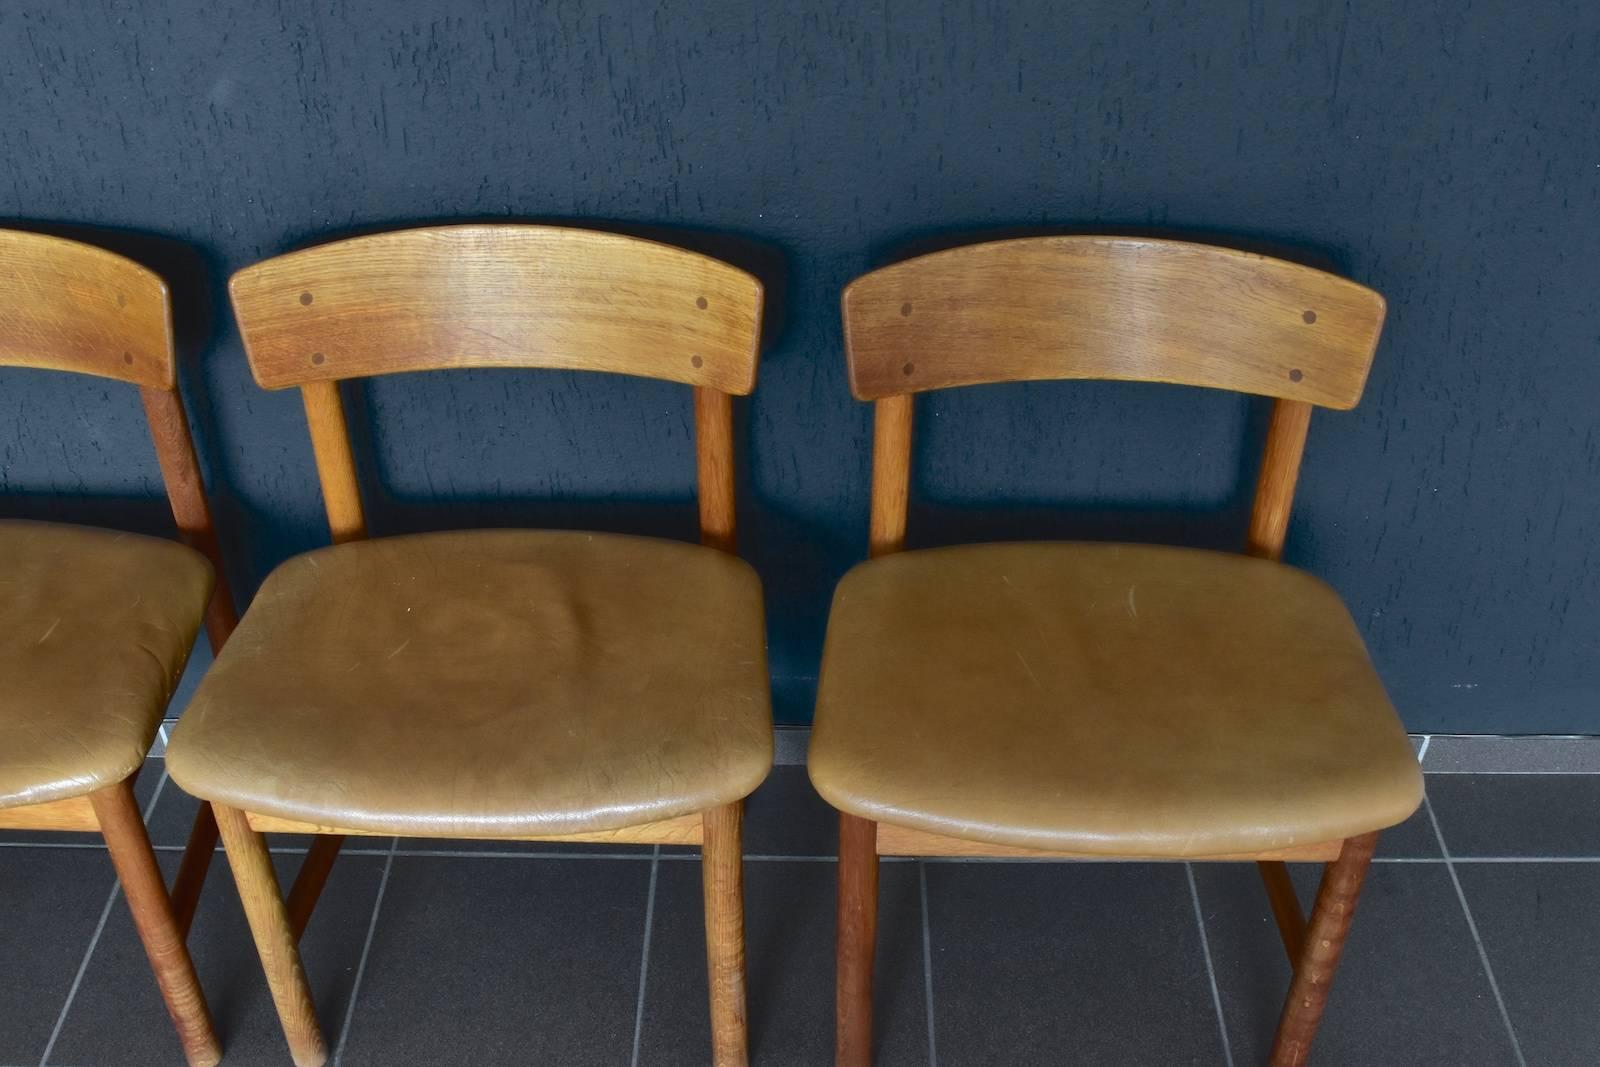 Leather Set of Four Børge Mogensen Chairs, Produced by Fredericia Furniture